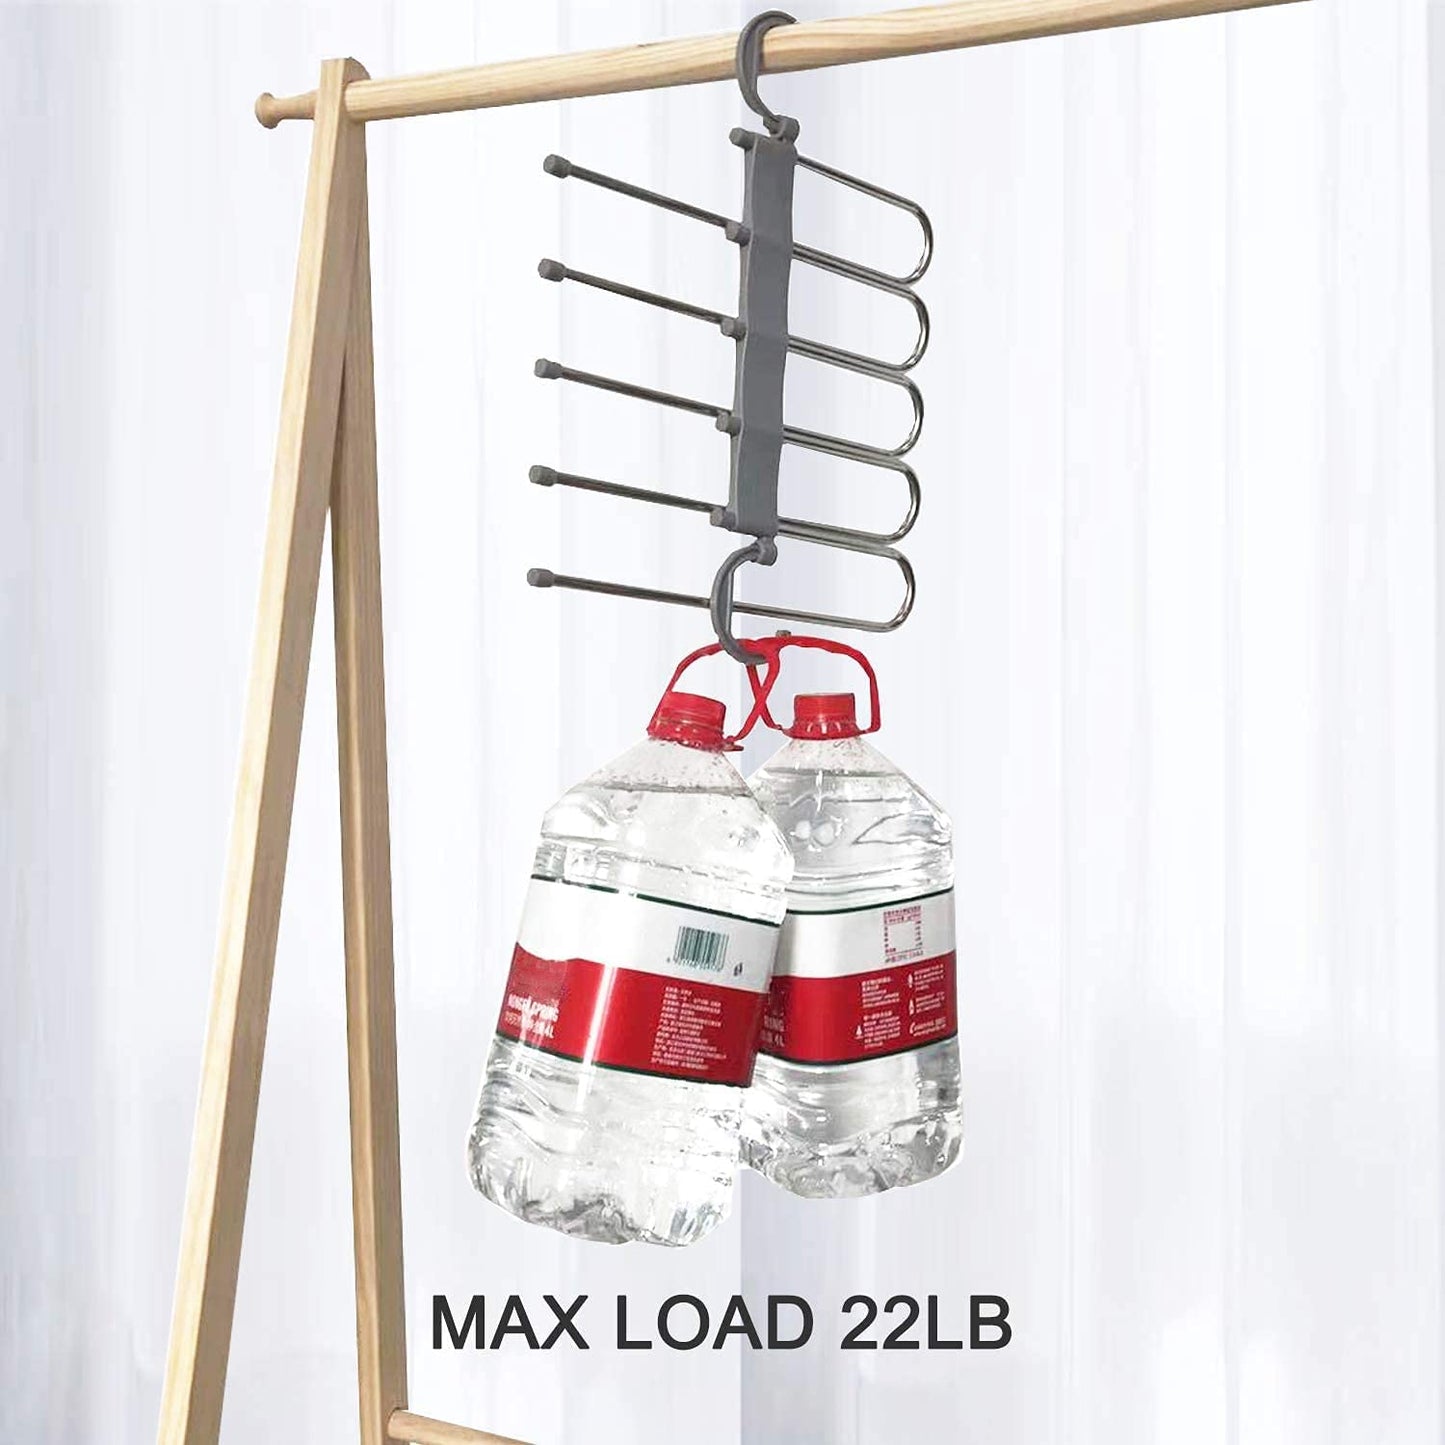 Stainless Steel Foldable Hangers for Clothes (Pack of 1)